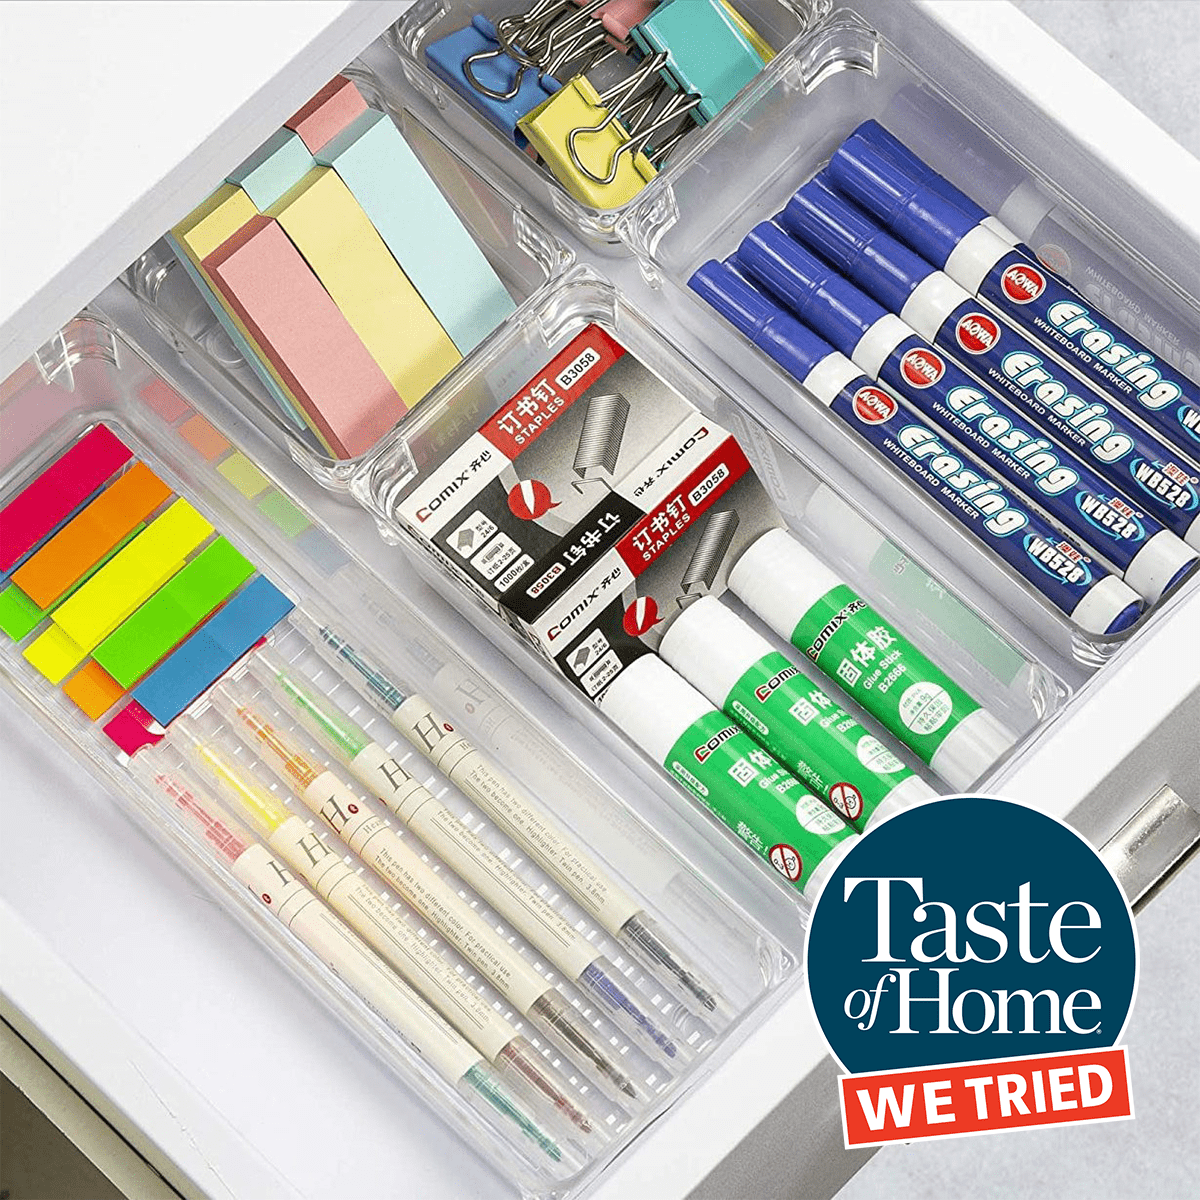 https://www.tasteofhome.com/wp-content/uploads/2023/01/chefstory-23-pieces-clear-drawer-organizers-ecomm-via-amazon.com_-e1673022555997.png?fit=700%2C700